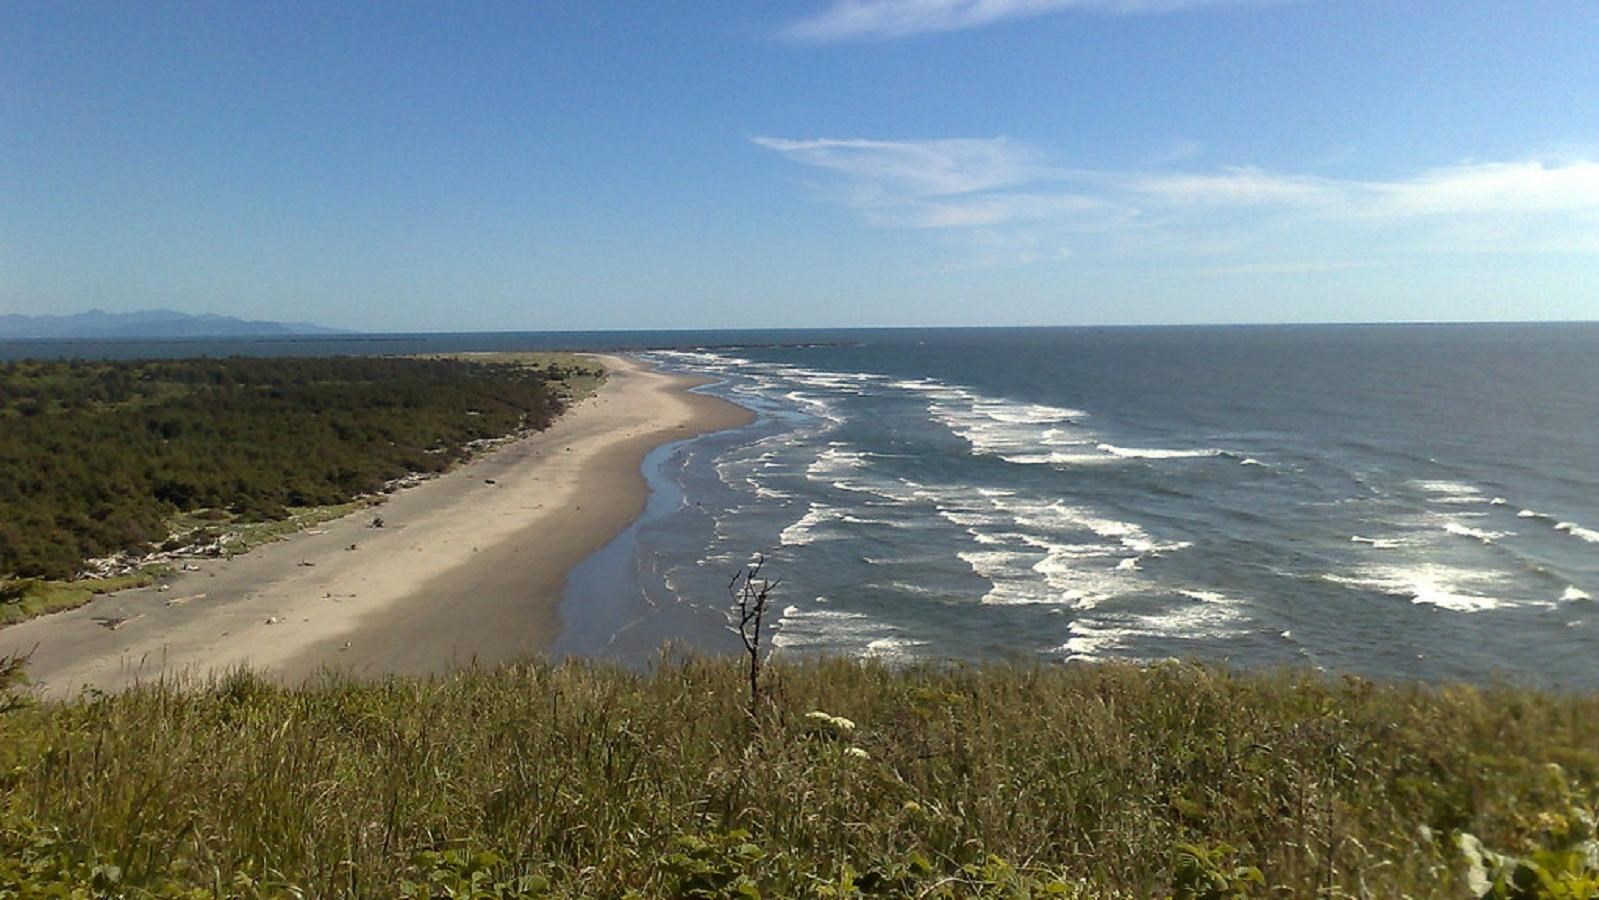 A view of the seashore from atop a grassy bluff, waves crashing against the shore below